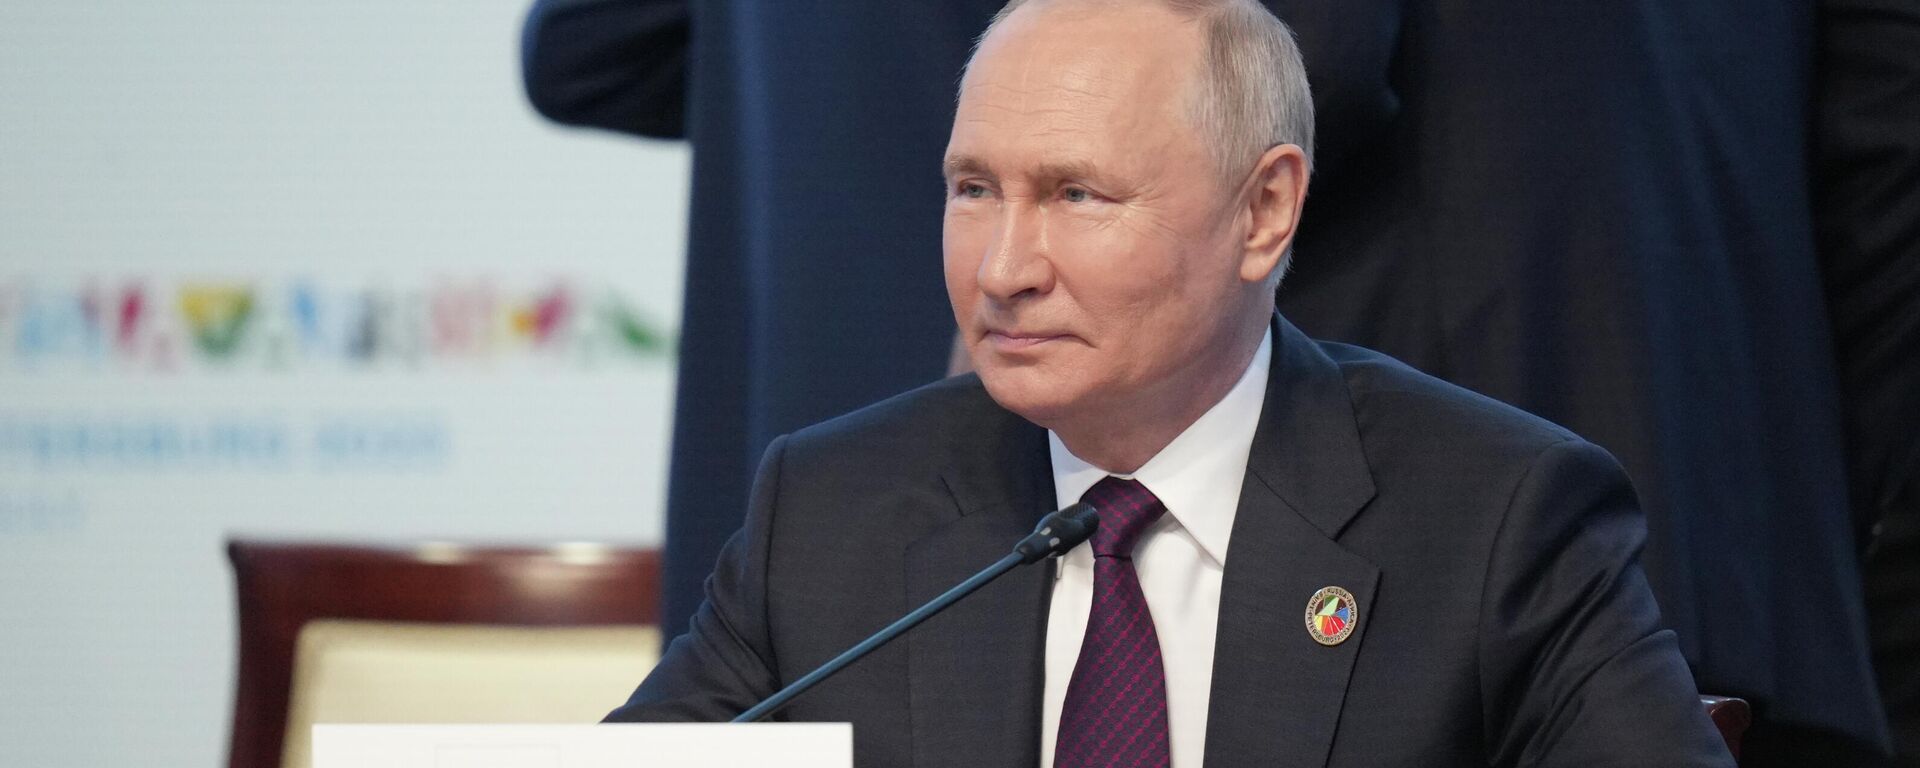 Russian President Vladimir Putin at the plenary session of the Second Russia-Africa Summit in St. Petersburg, July 28, 2023 - Sputnik Africa, 1920, 28.07.2023